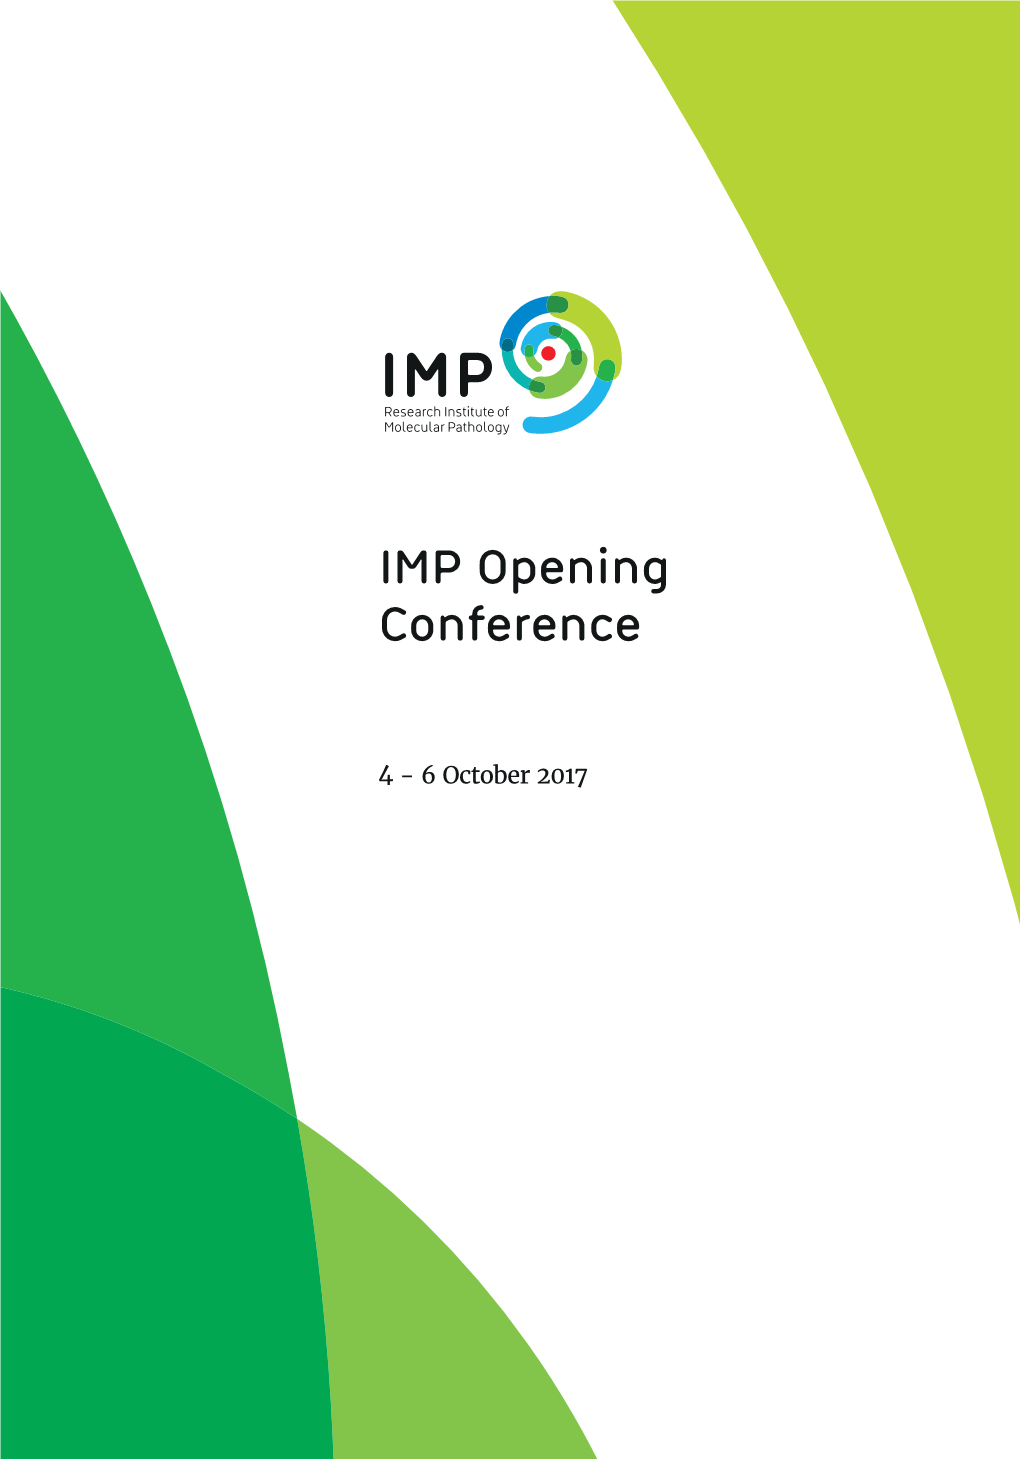 IMP Opening Conference Programme